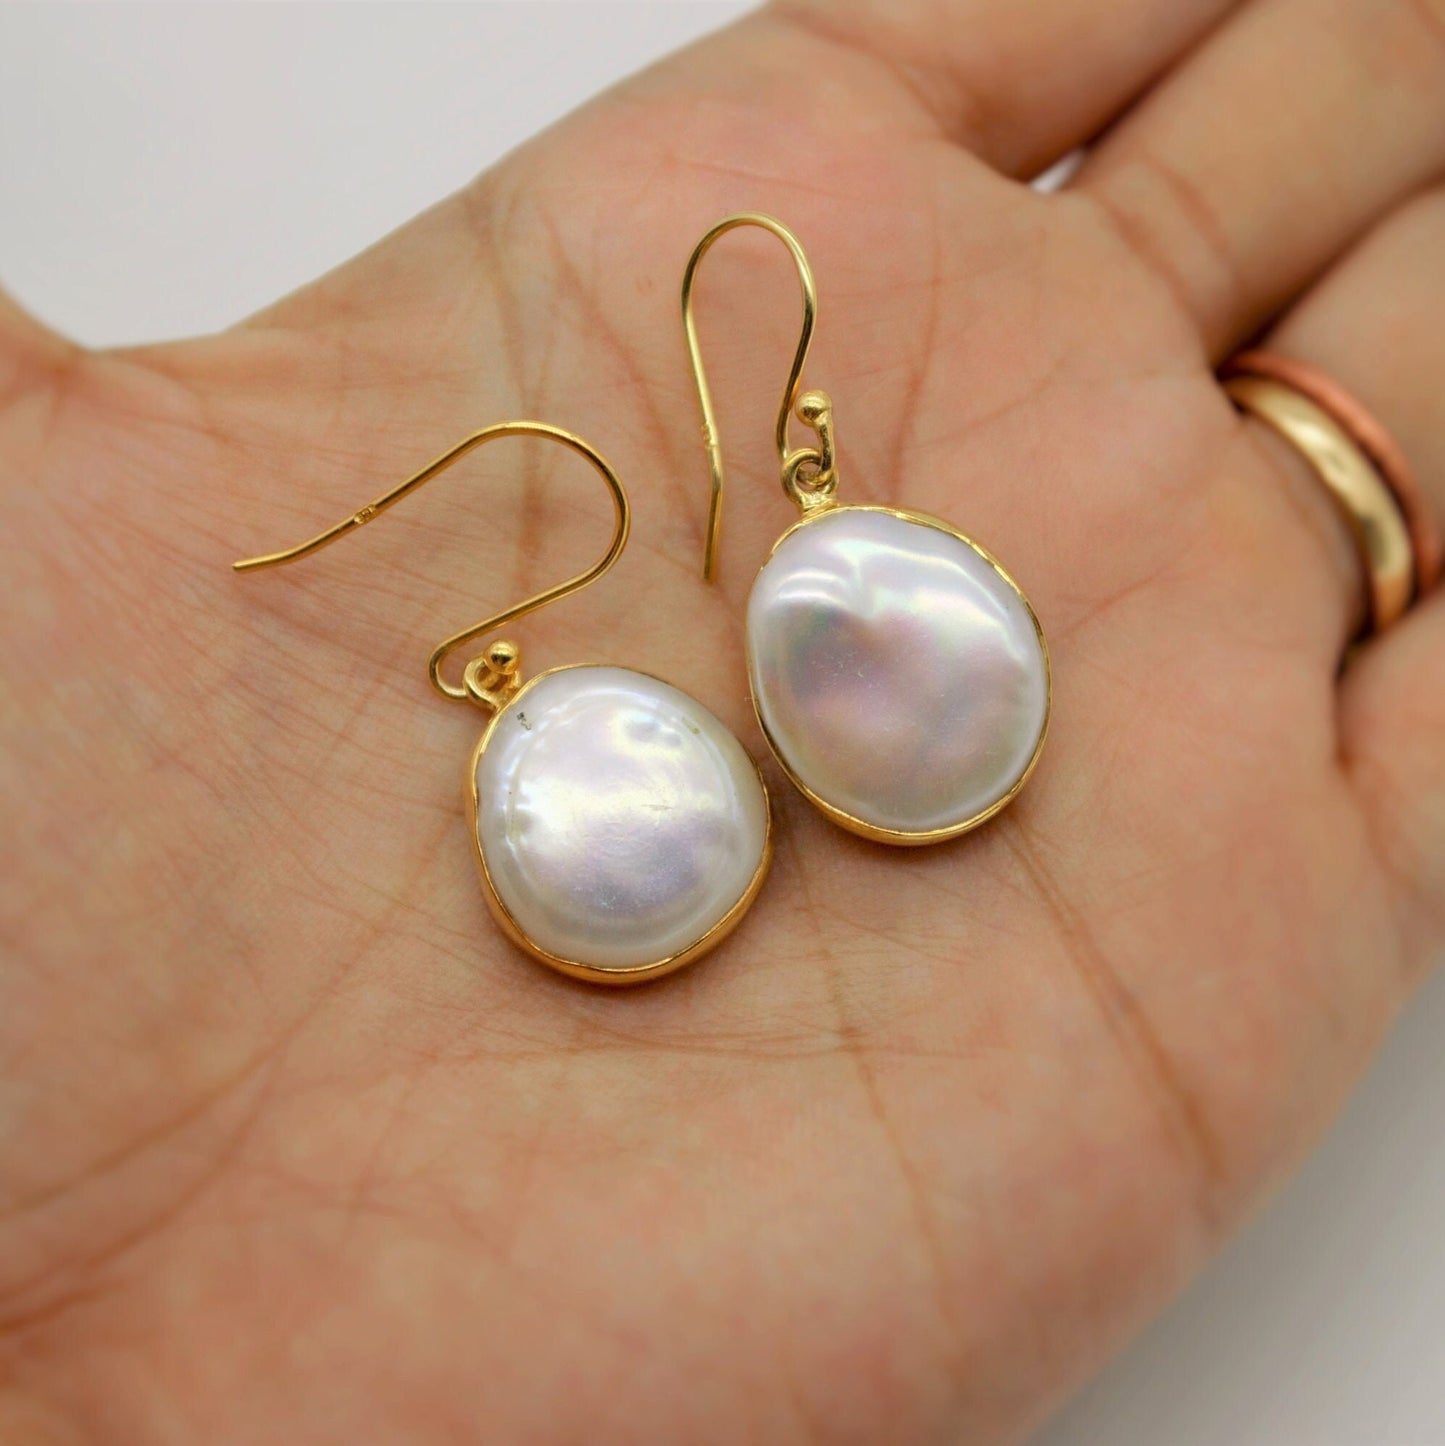 Pearl Earrings, Gold Plated Sterling Silver, June Birthstone Drop Earrings, Gemstone Earrings, Mothers Day Gift For Her, Birthday Gift